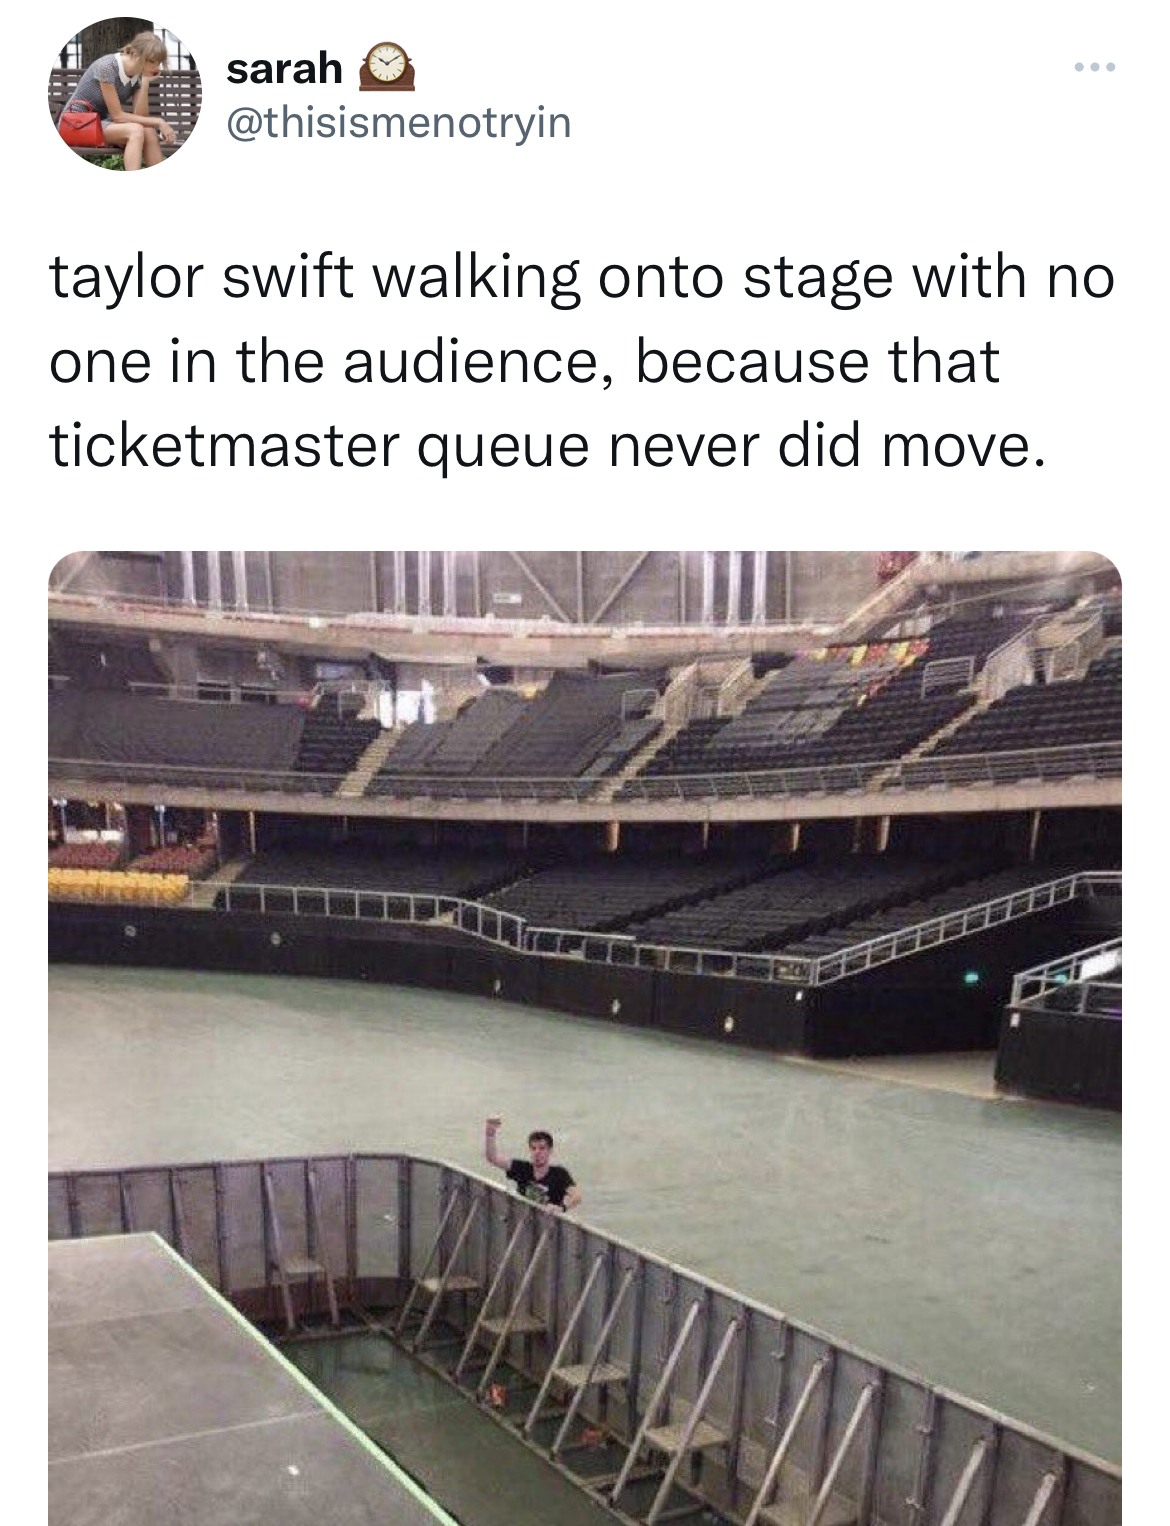 Tweets dunking on celebs - fixed link - sarah taylor swift walking onto stage with no one in the audience, because that ticketmaster queue never did move.